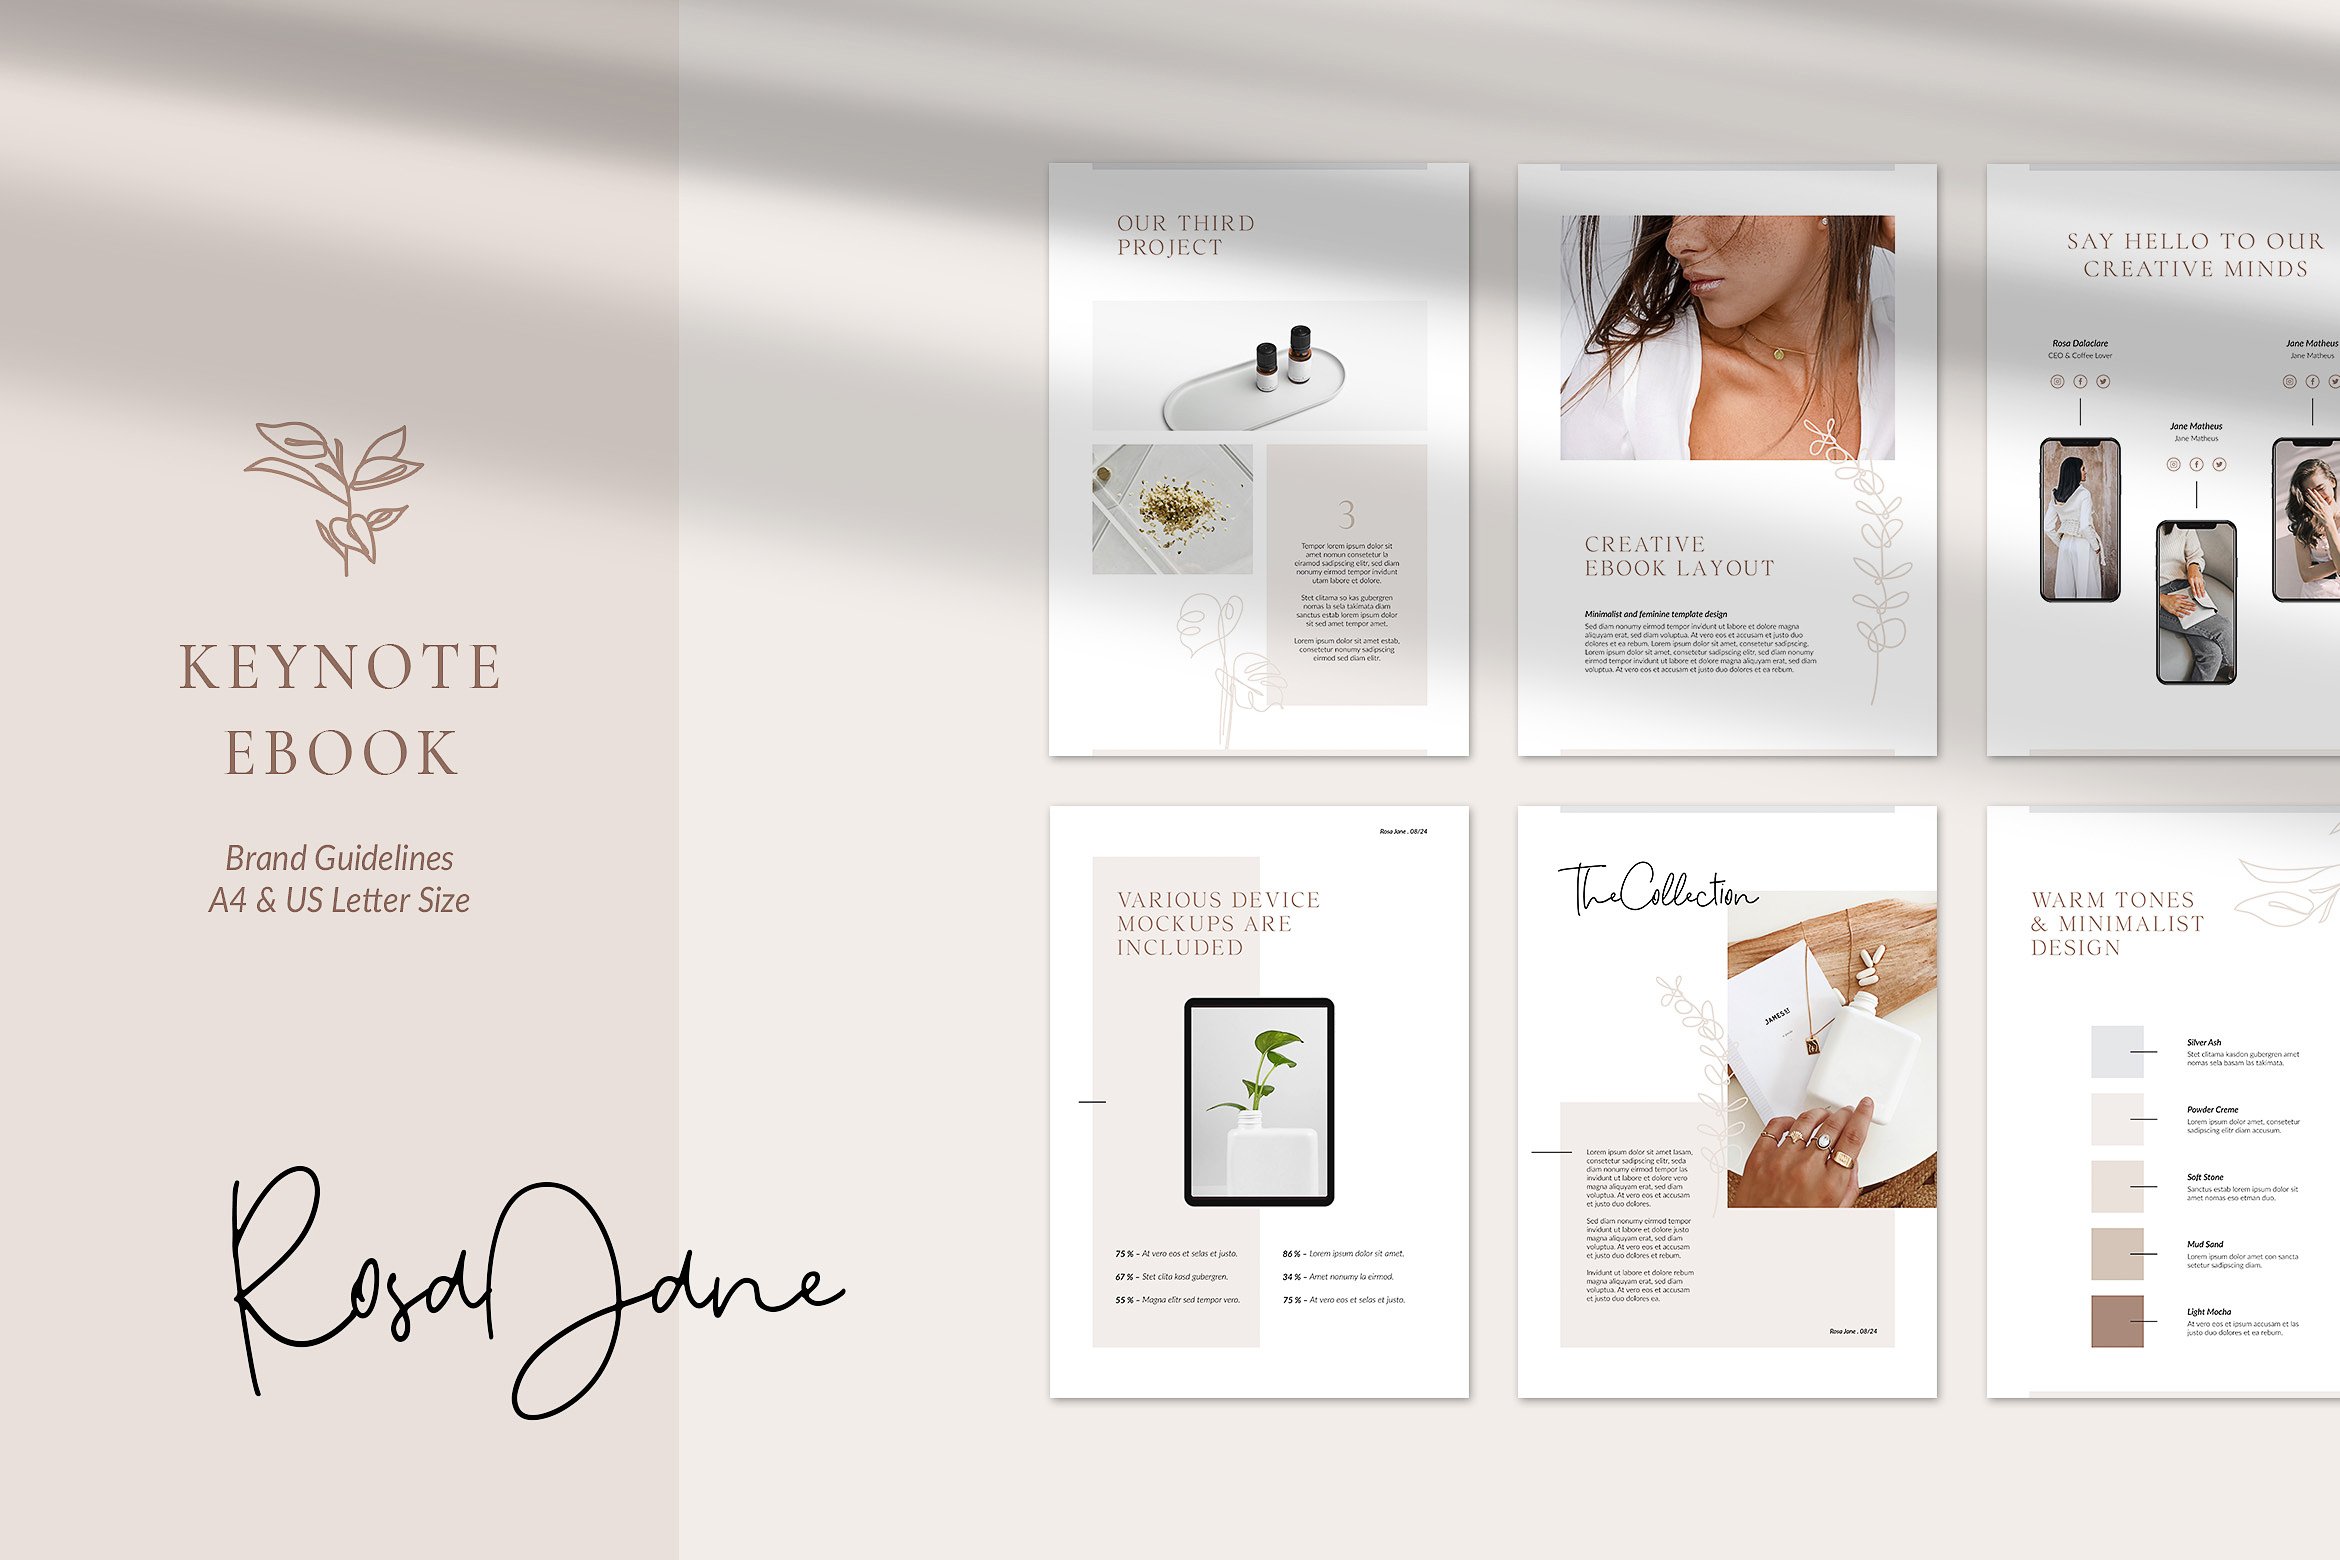 Keynote Bundle Feminine is a mobile friendly template with the flexible design.